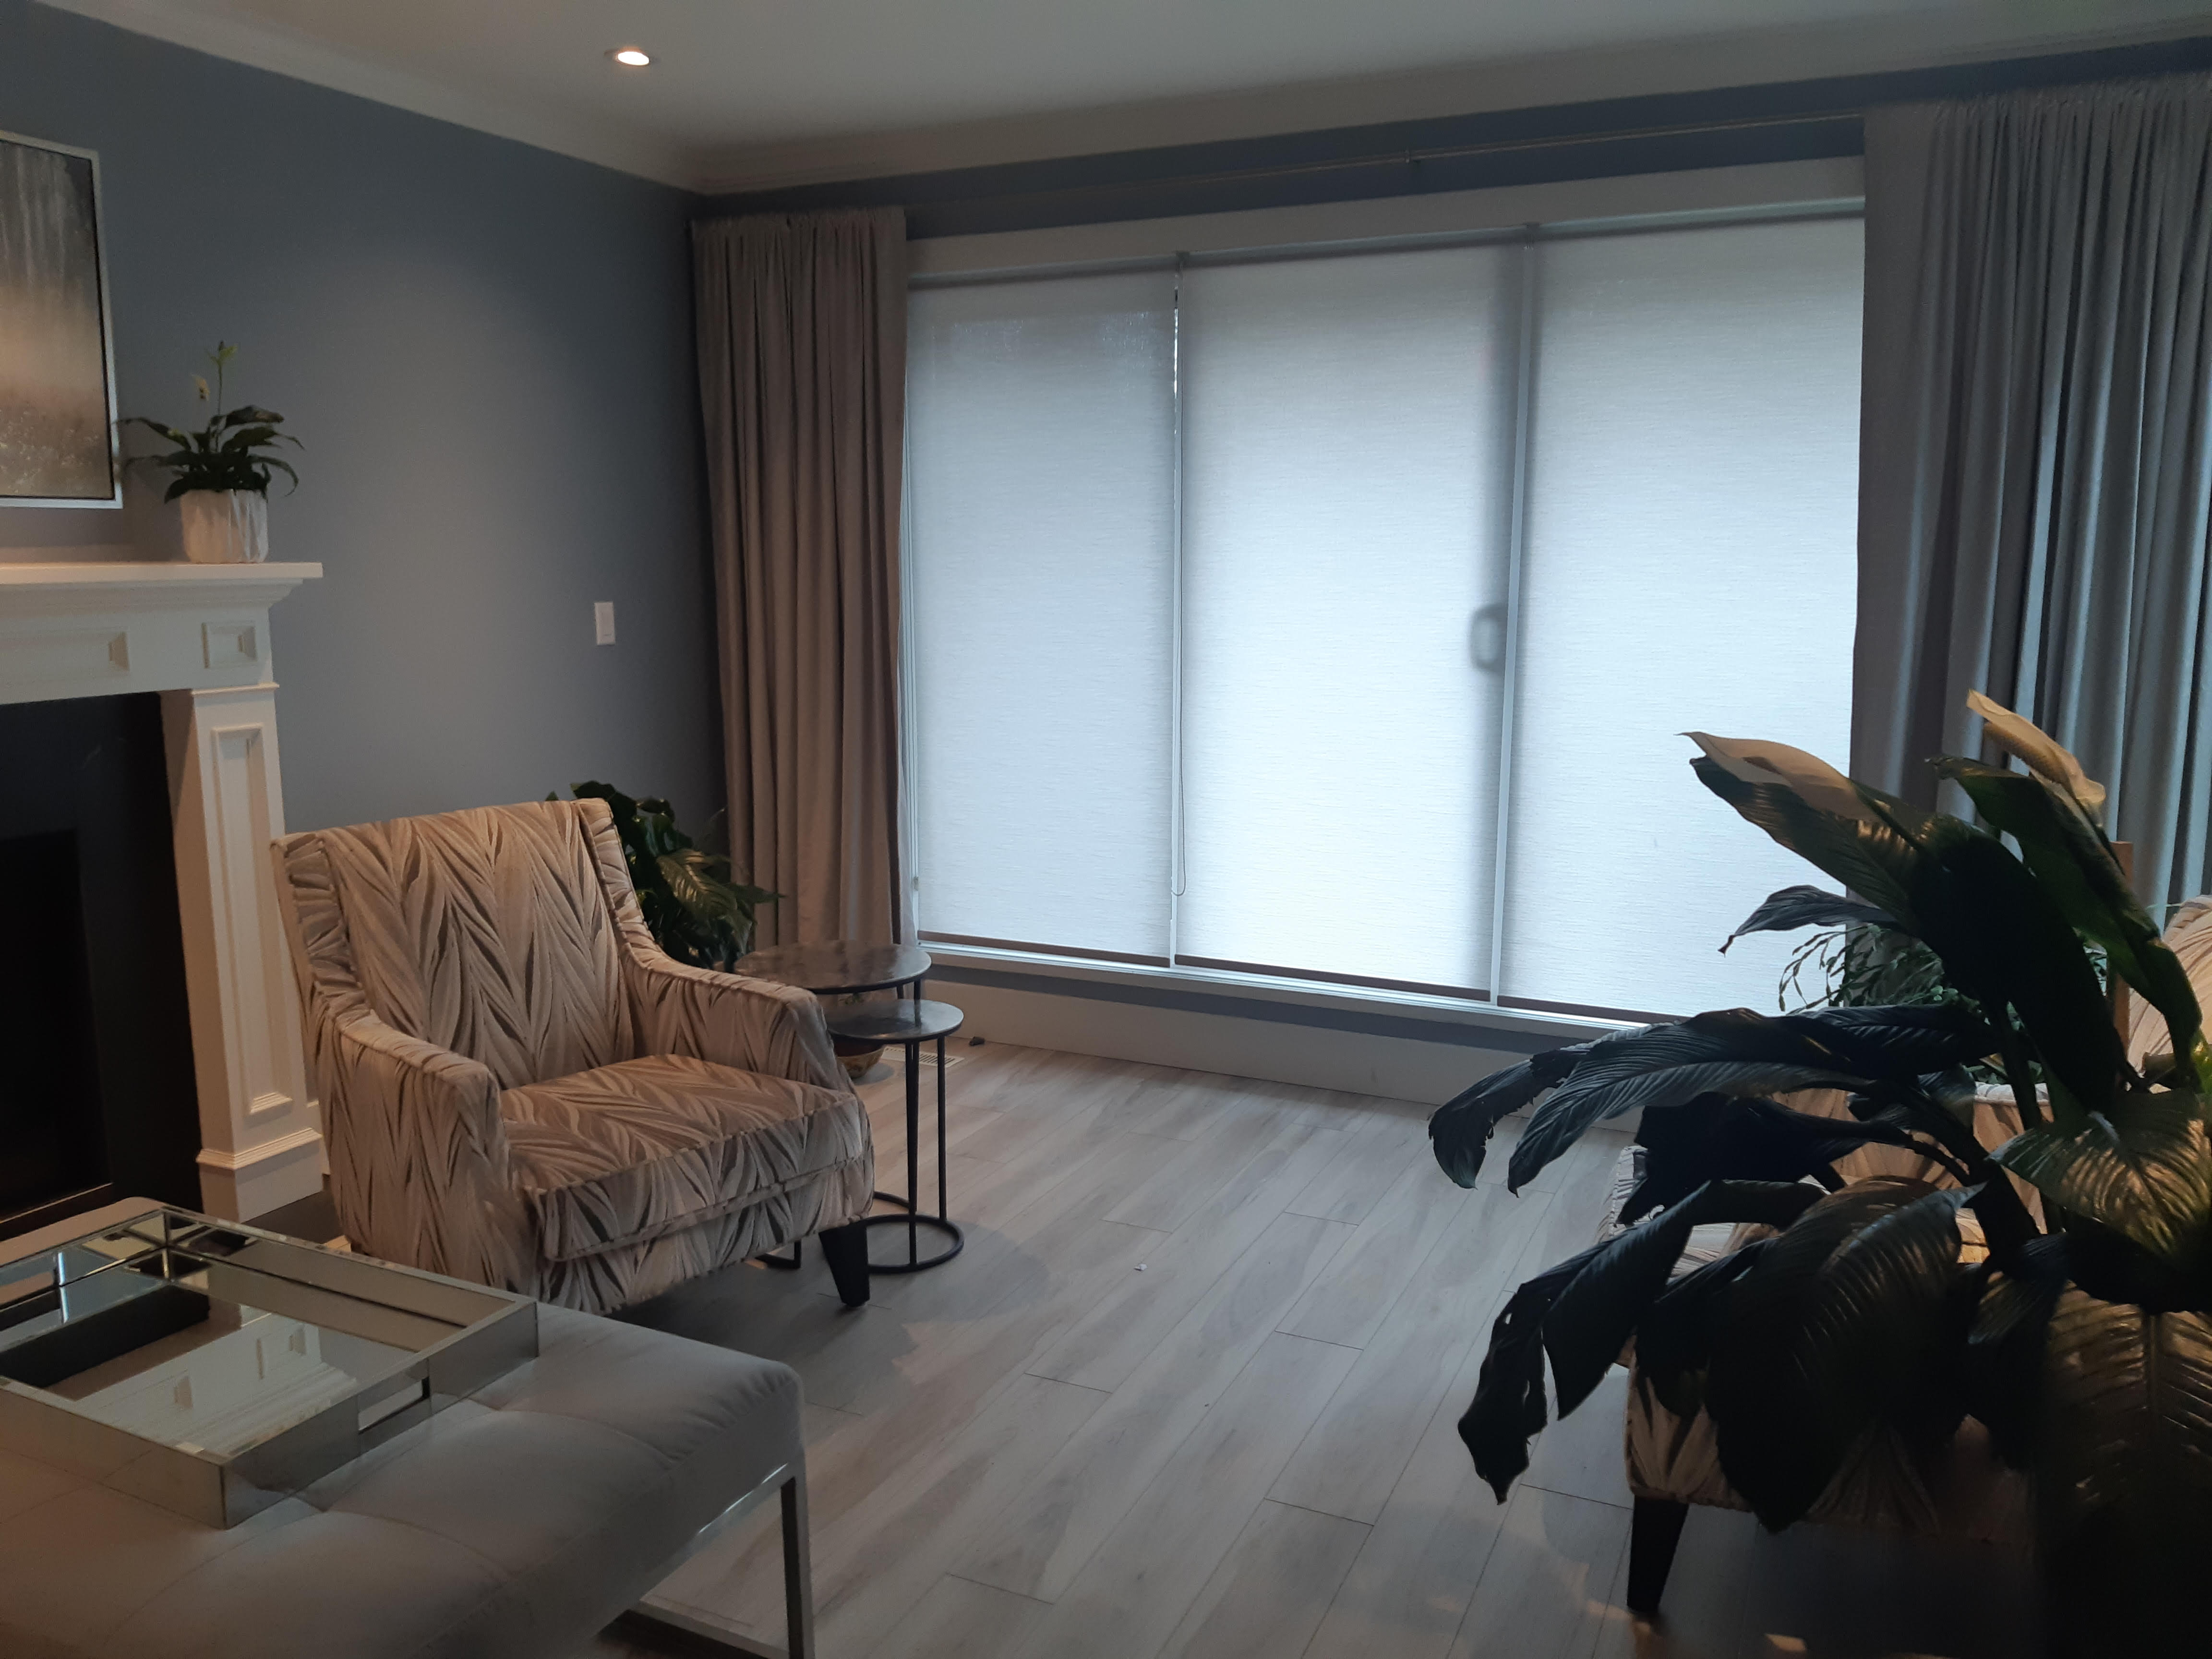 Budget Blinds of North & West Vancouver in North Vancouver